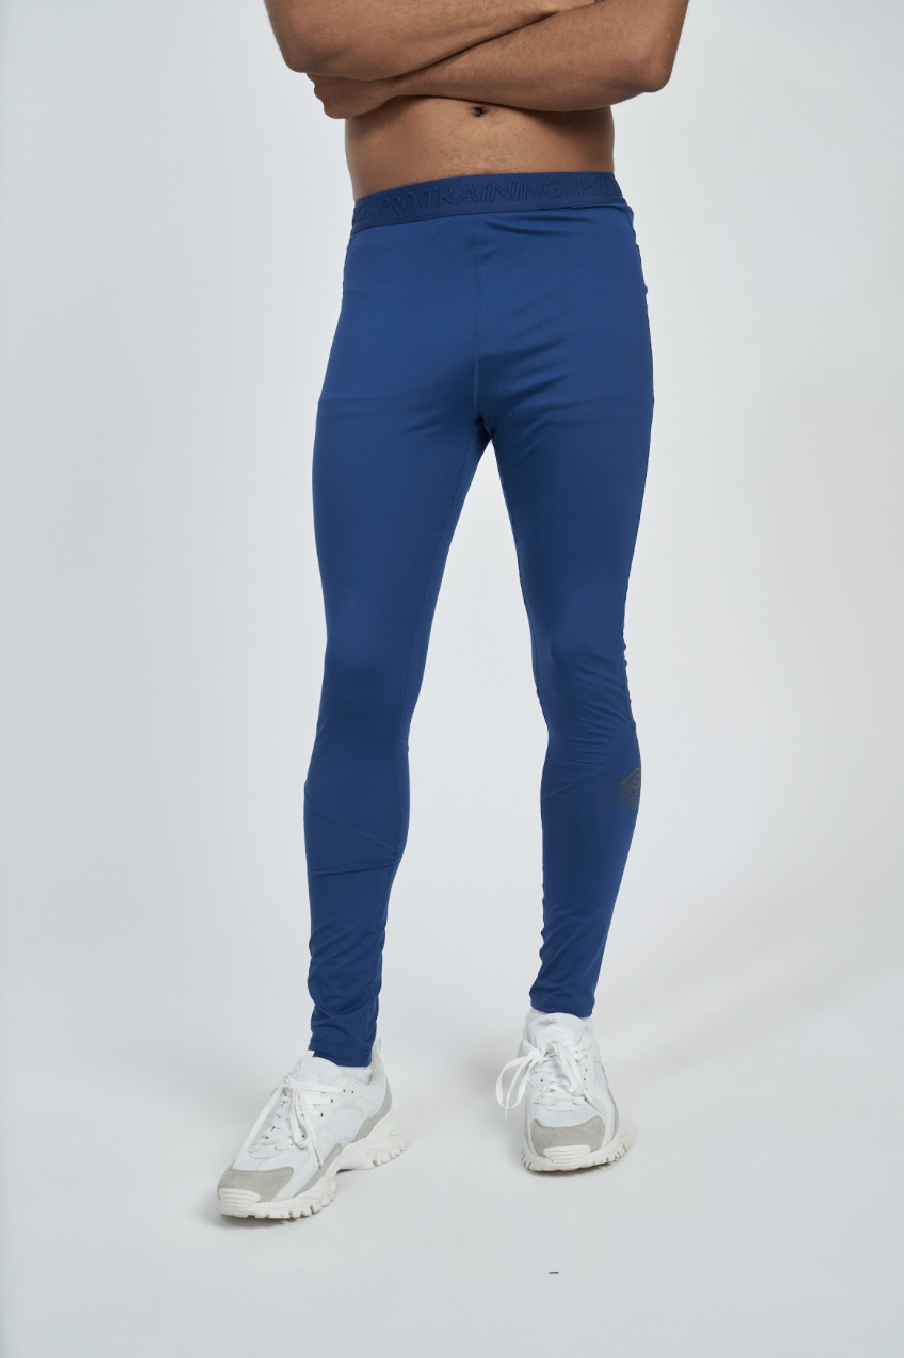 Umbro Men's Pants - Discover our sports fashion collection